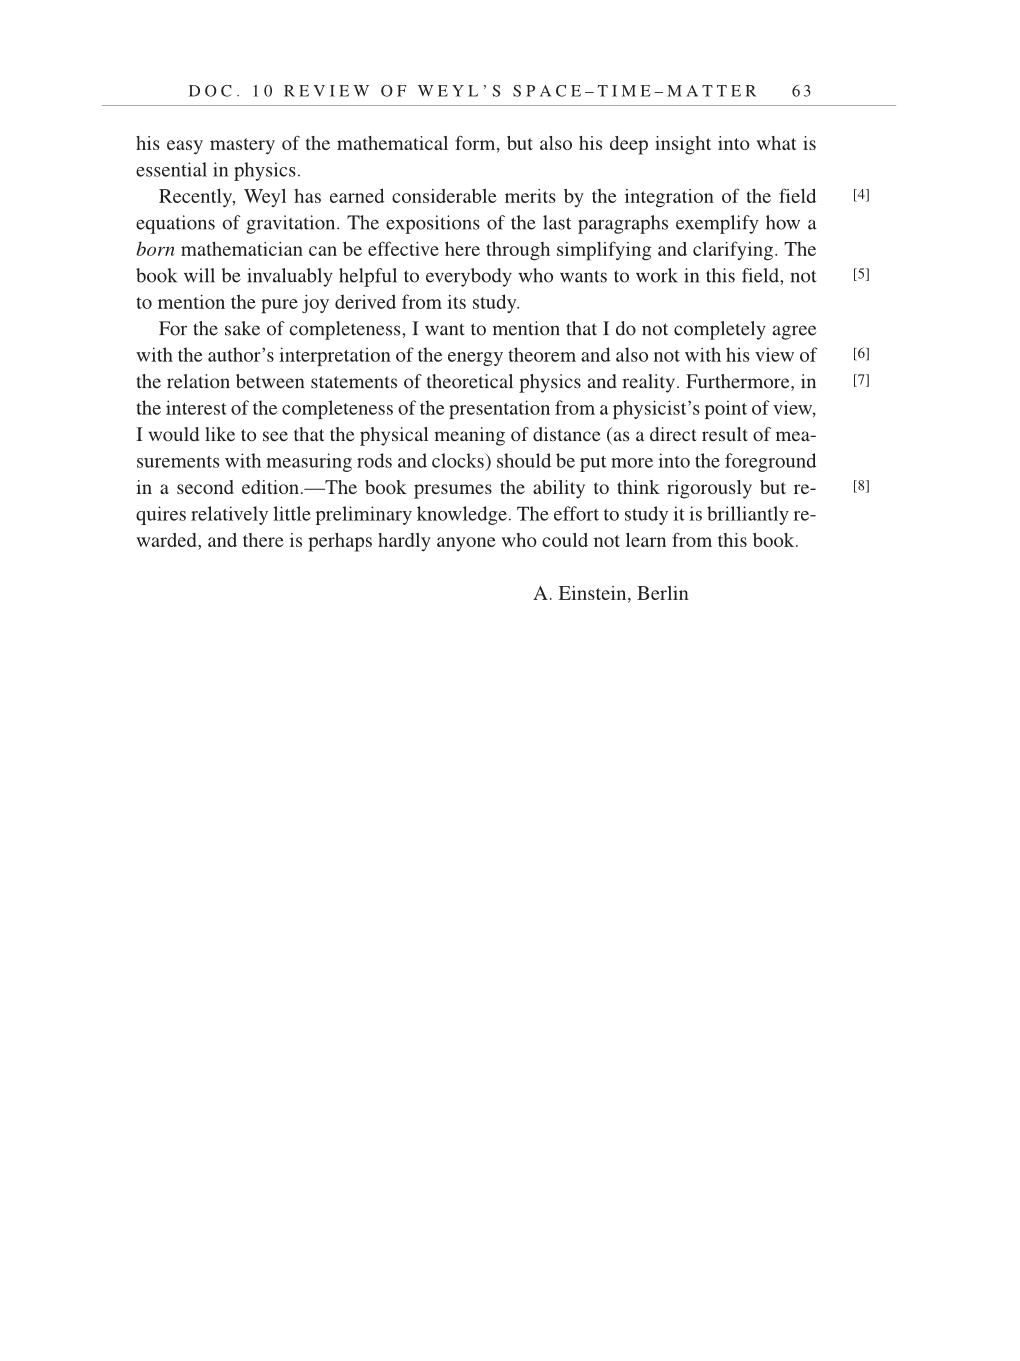 Volume 7: The Berlin Years: Writings, 1918-1921 (English translation supplement) page 63